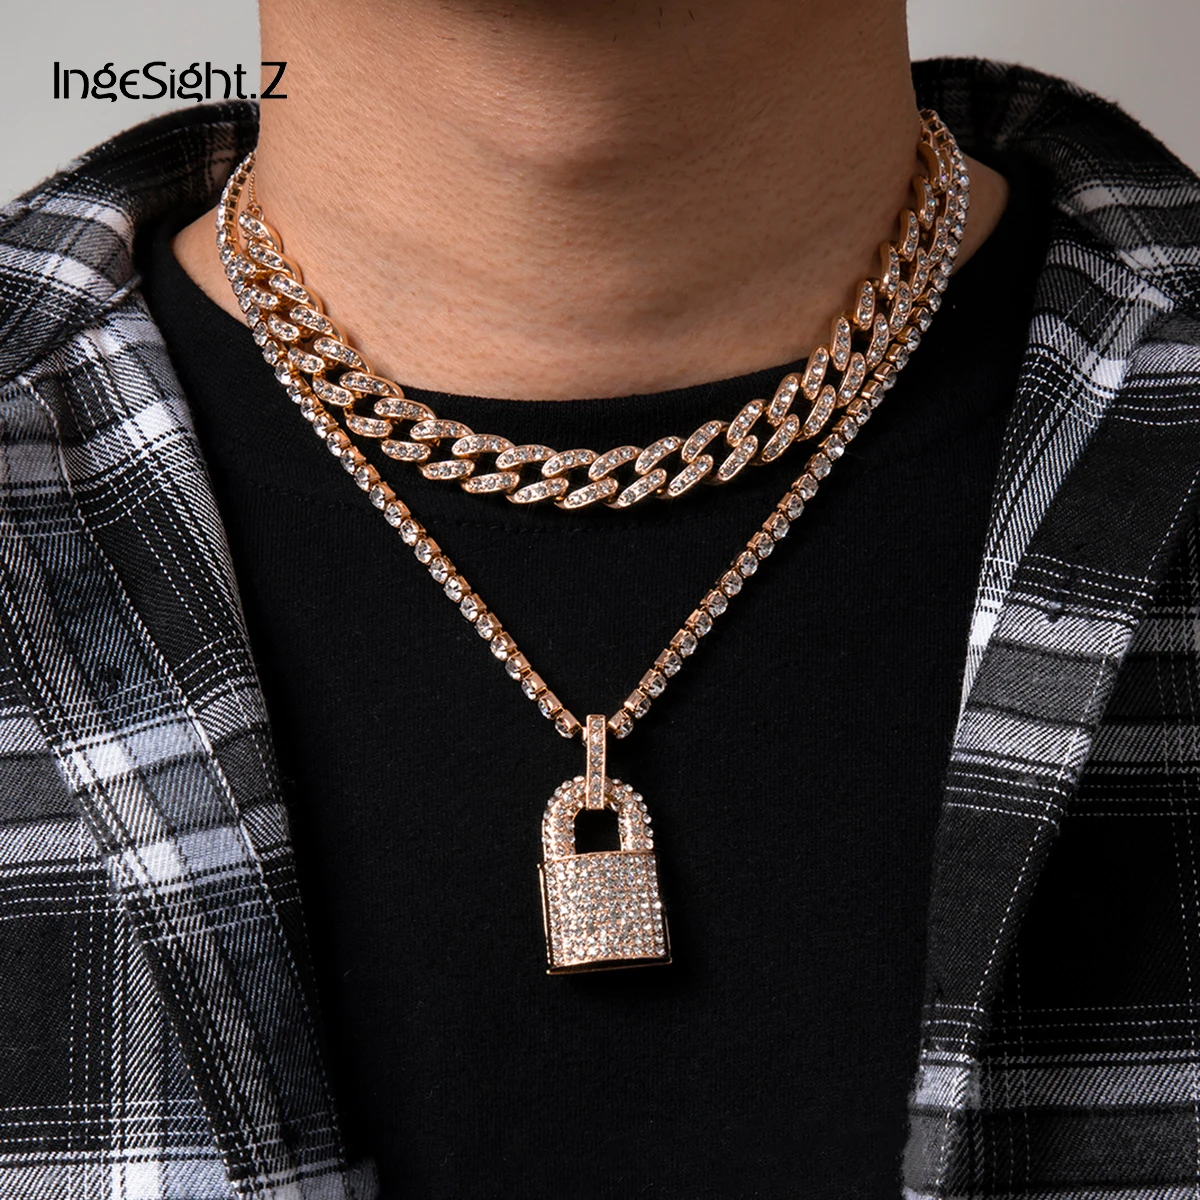 

IngeSight.Z Hip Hop Iced Out Rhinestones Miami Curb Cuban Choker Necklace Multi Layered Crystal Padlock Pendant Necklace Jewelry